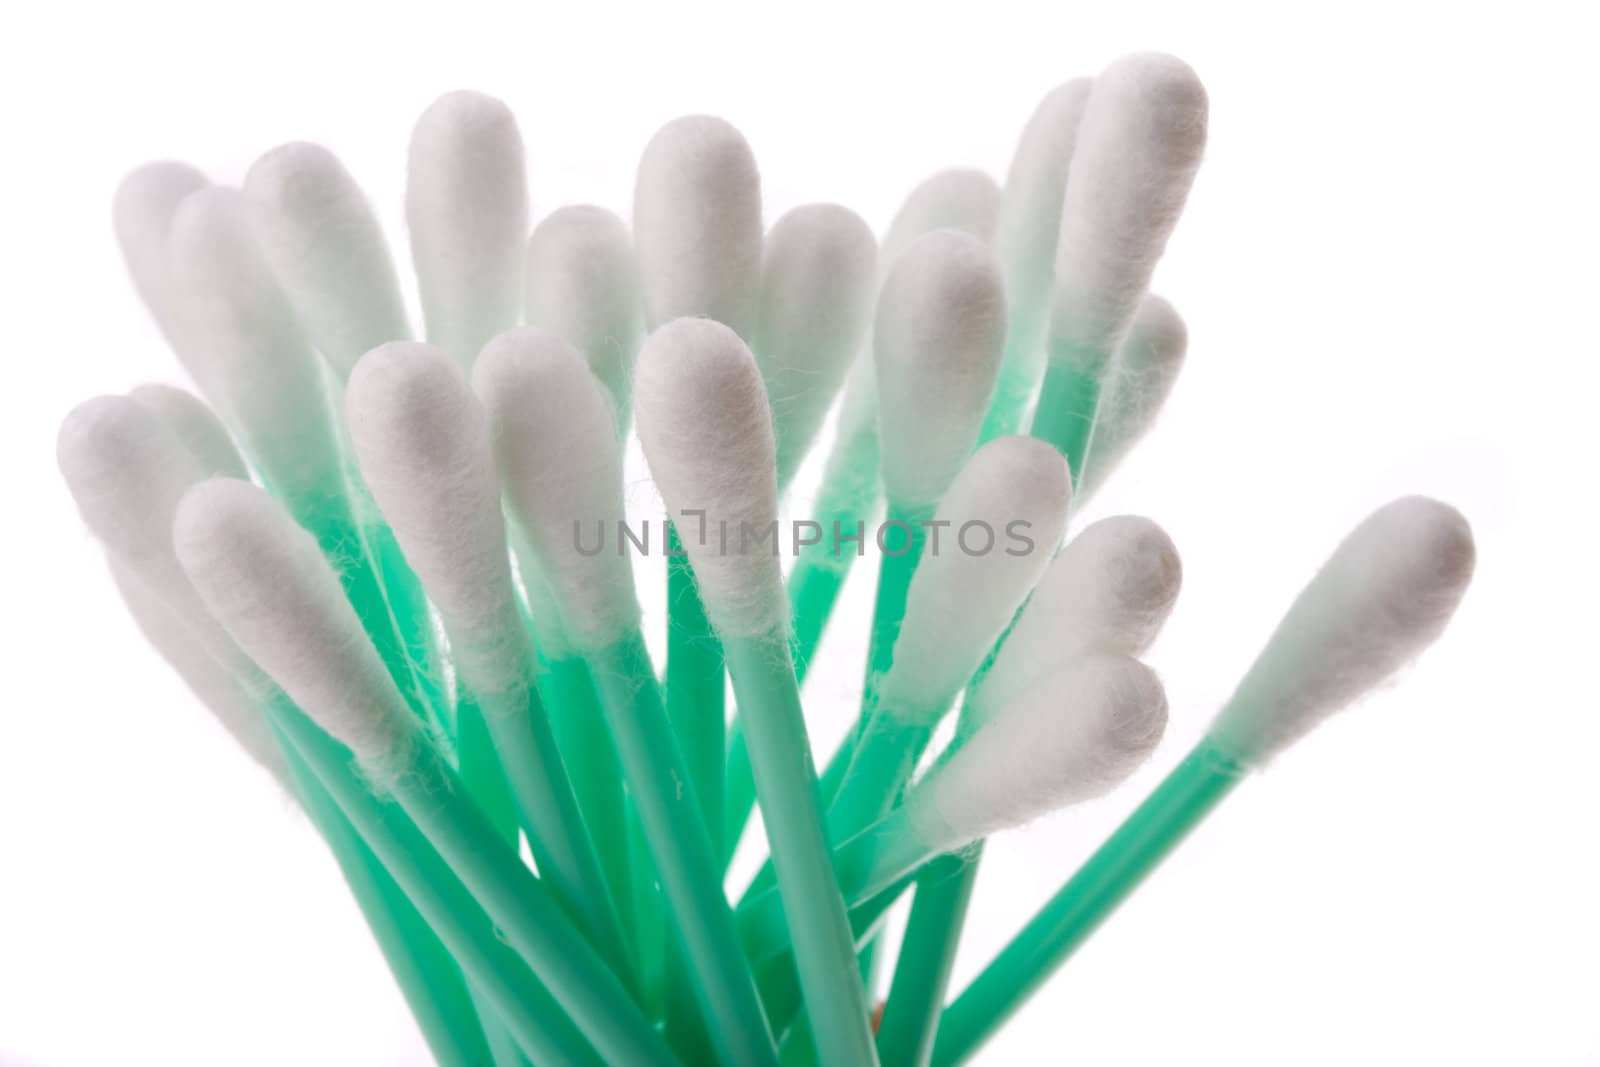 detail of cotton swabs on white background by bernjuer